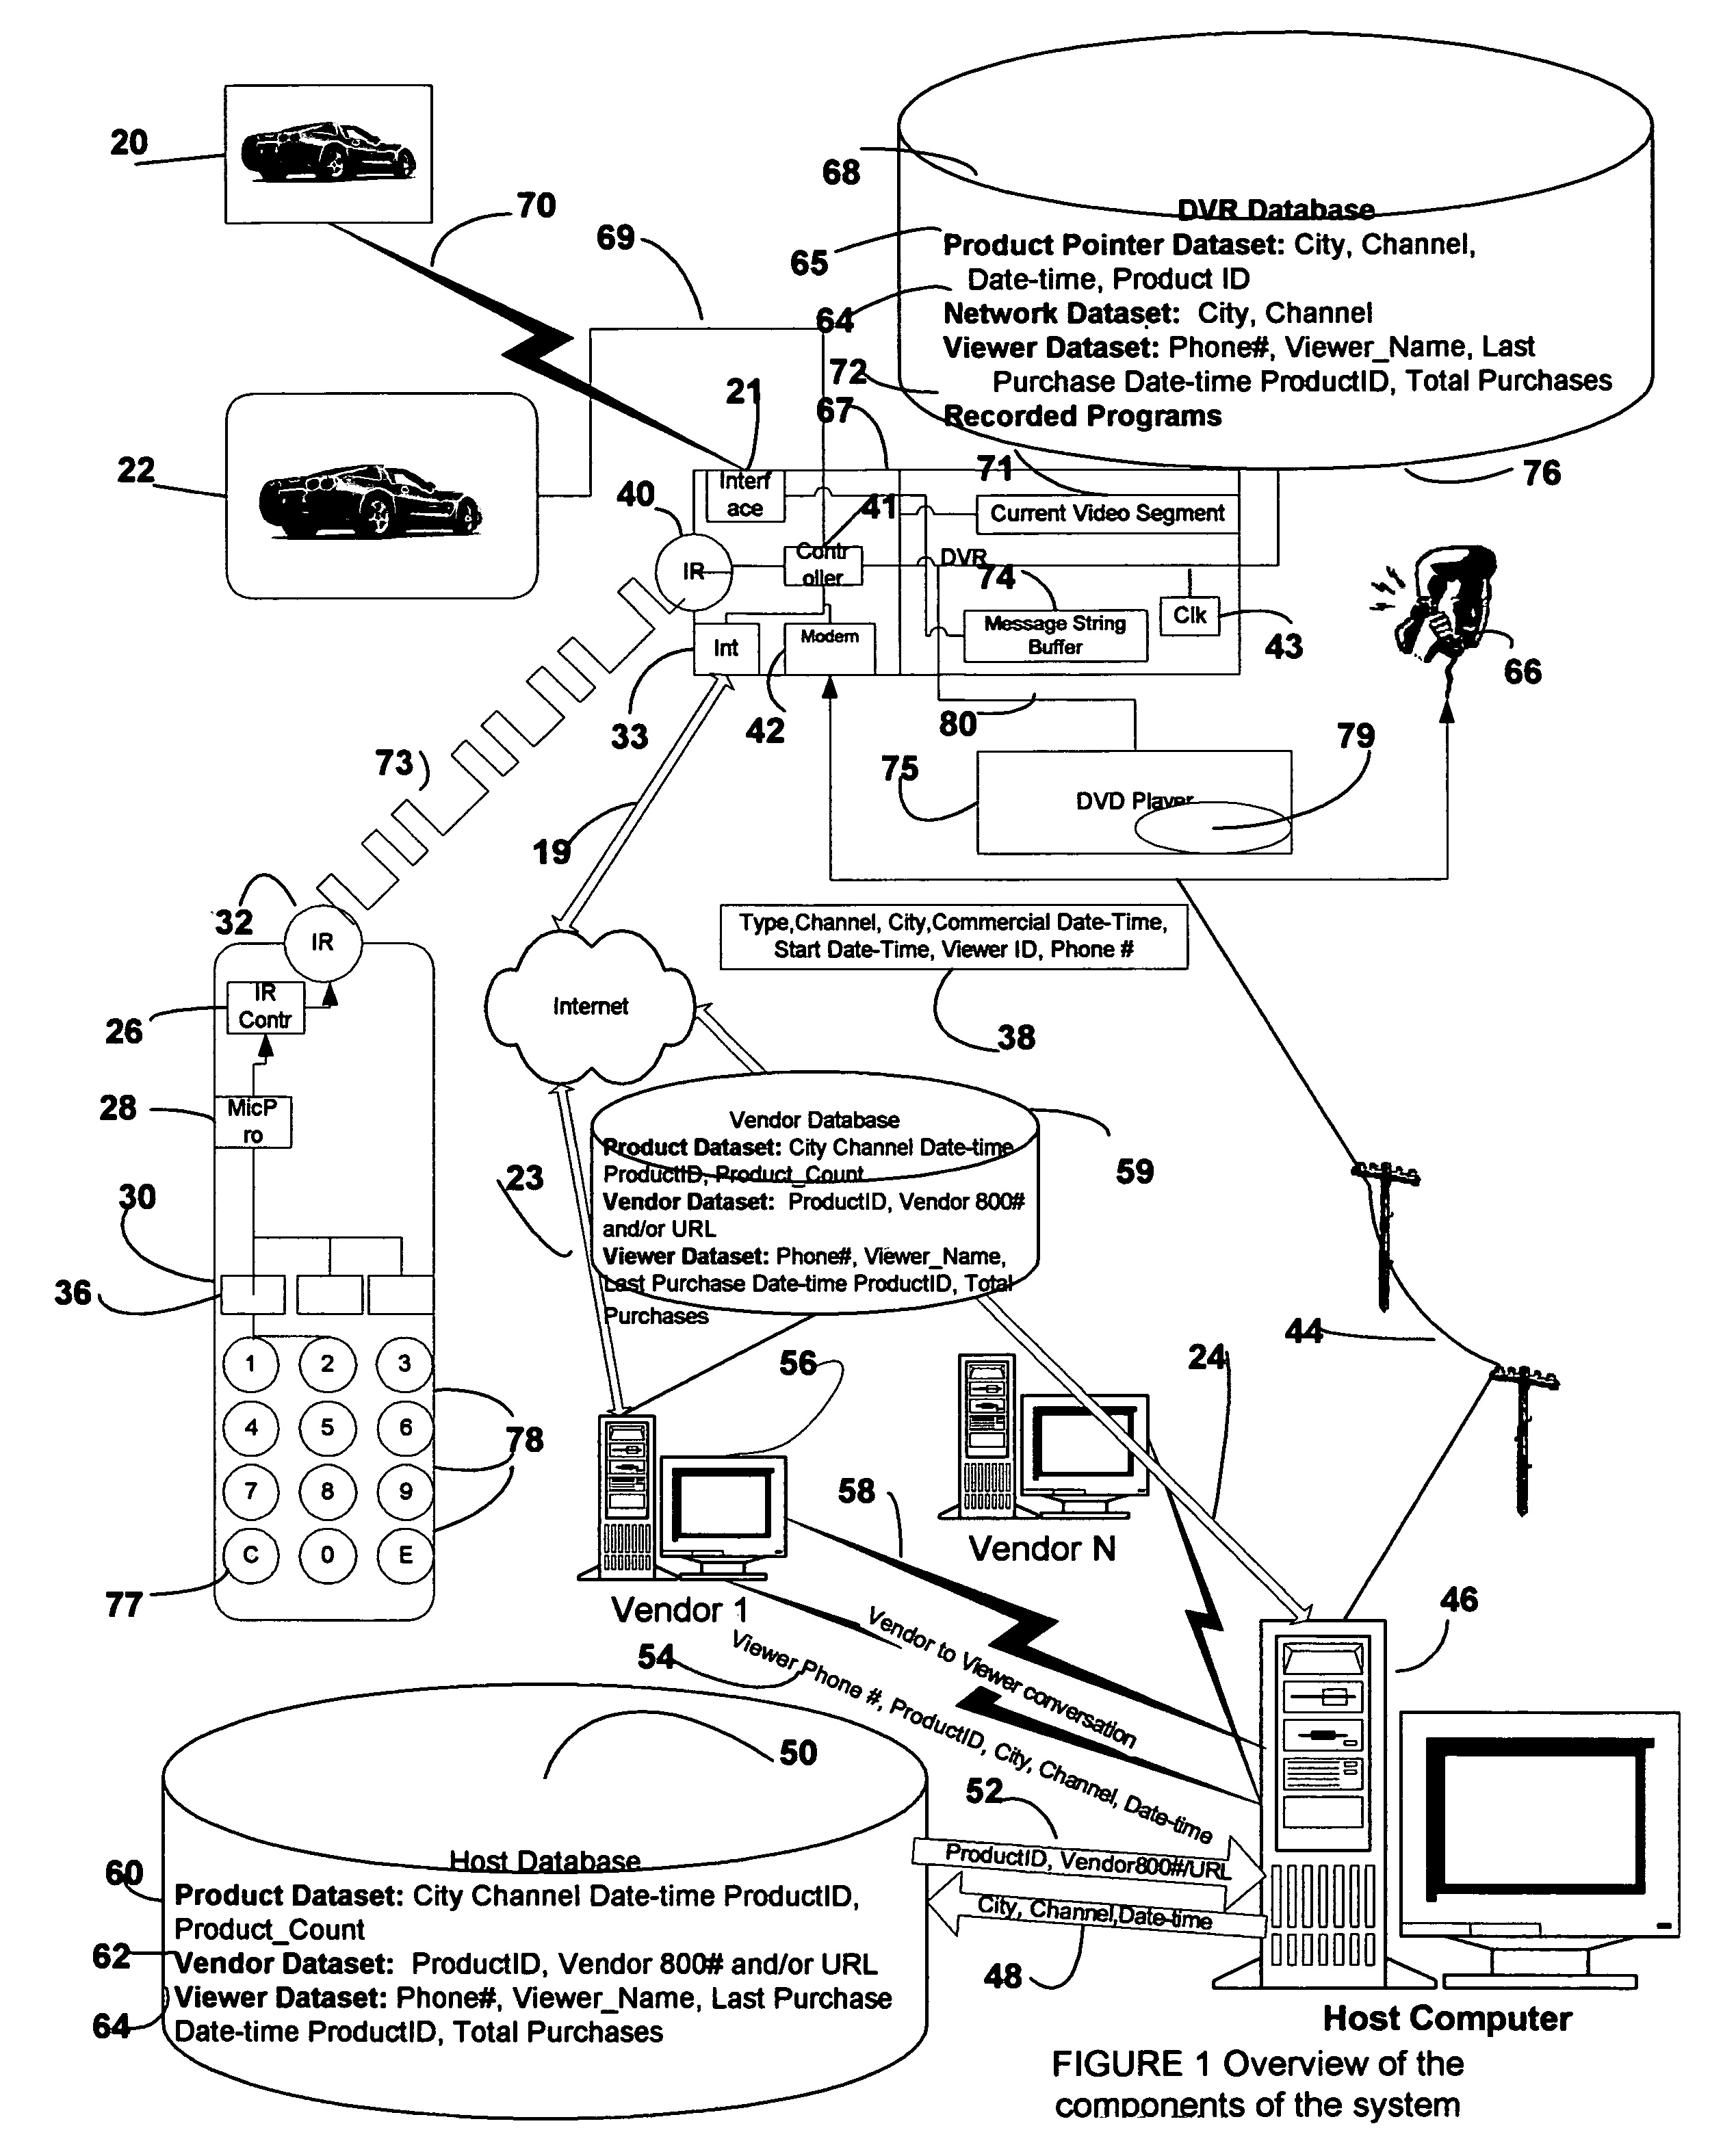 System for buying goods and services